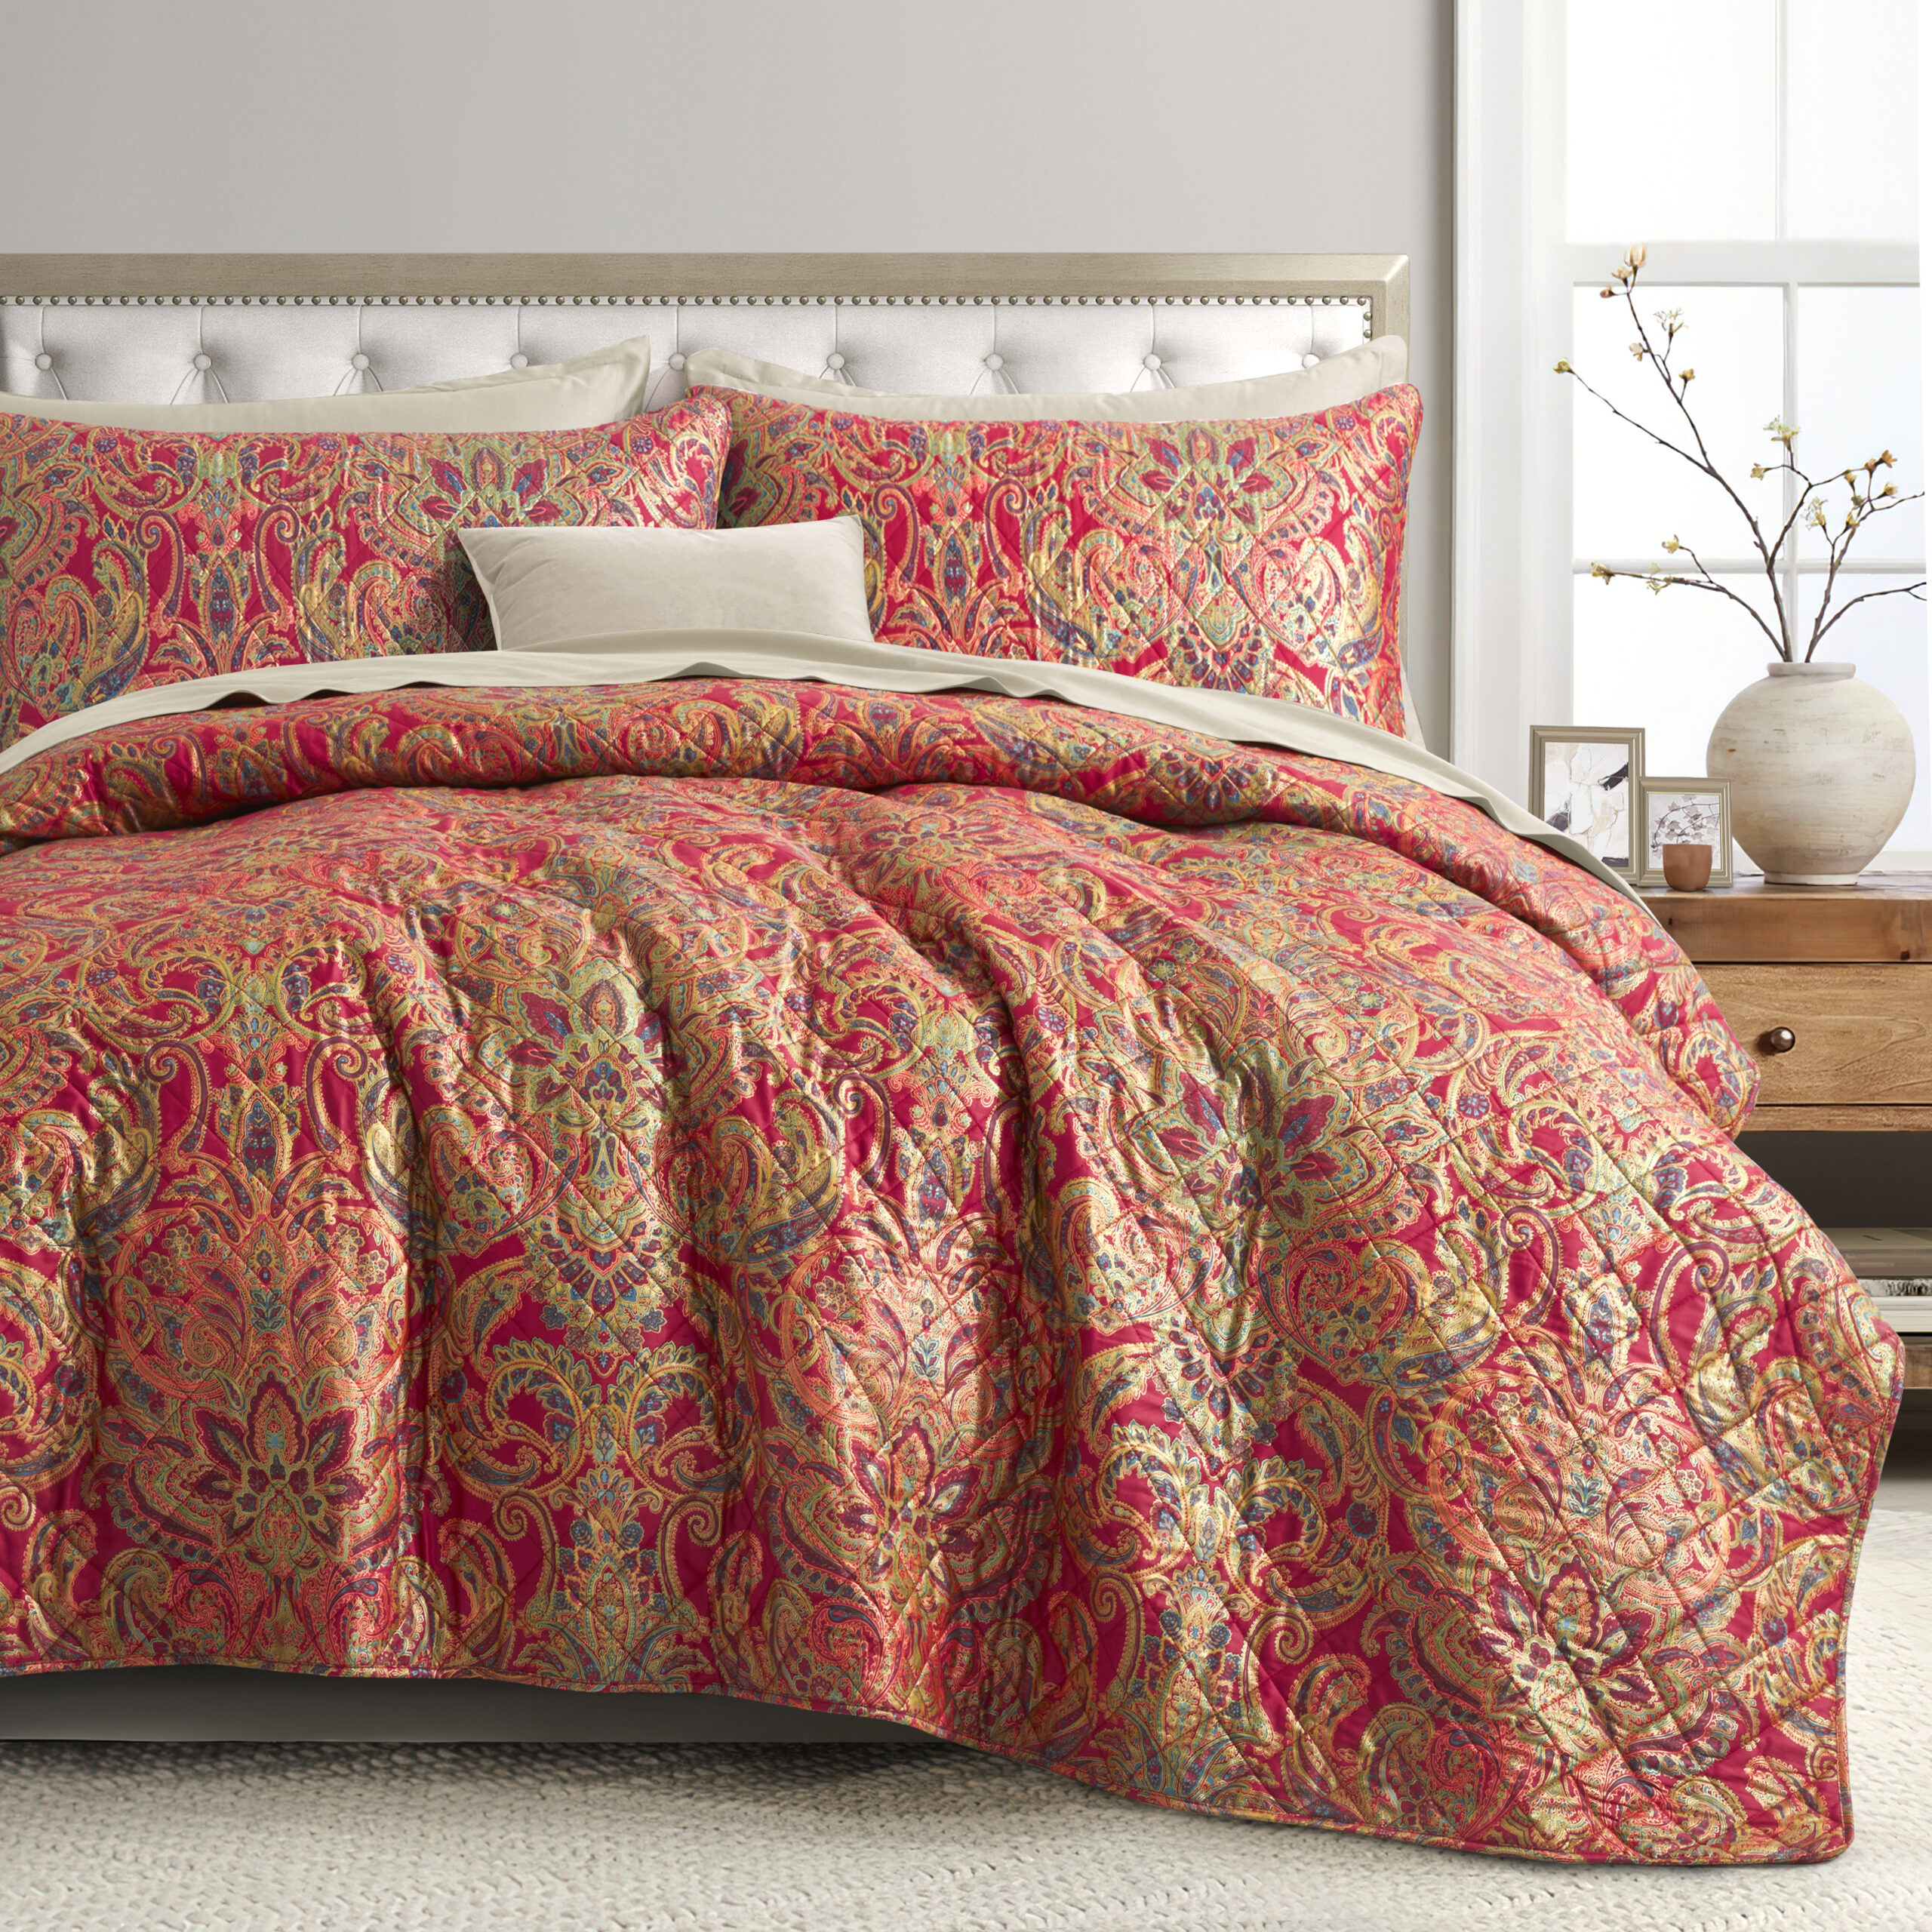 samfund accent inkompetence Classical Paisley Print Luxury Quilt and Shams Puff Bedding Set Bohemian  Damask Medallion Bedspread Cotton Sateen Coverlet Bothe Red Gold – [eikei]